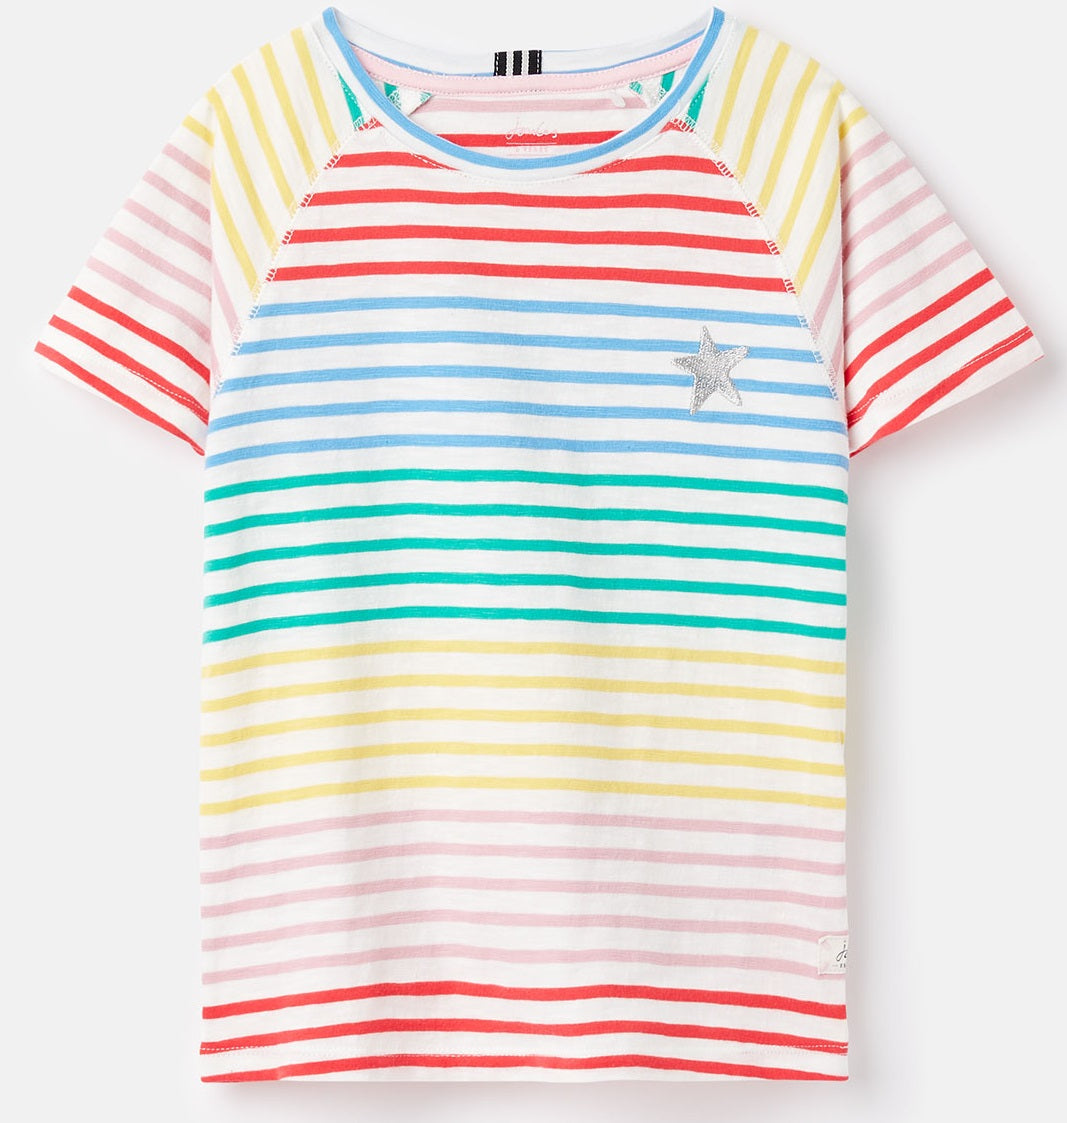 Joules Berry Null Chest Embroidery T-Shirt in Multi Stripe